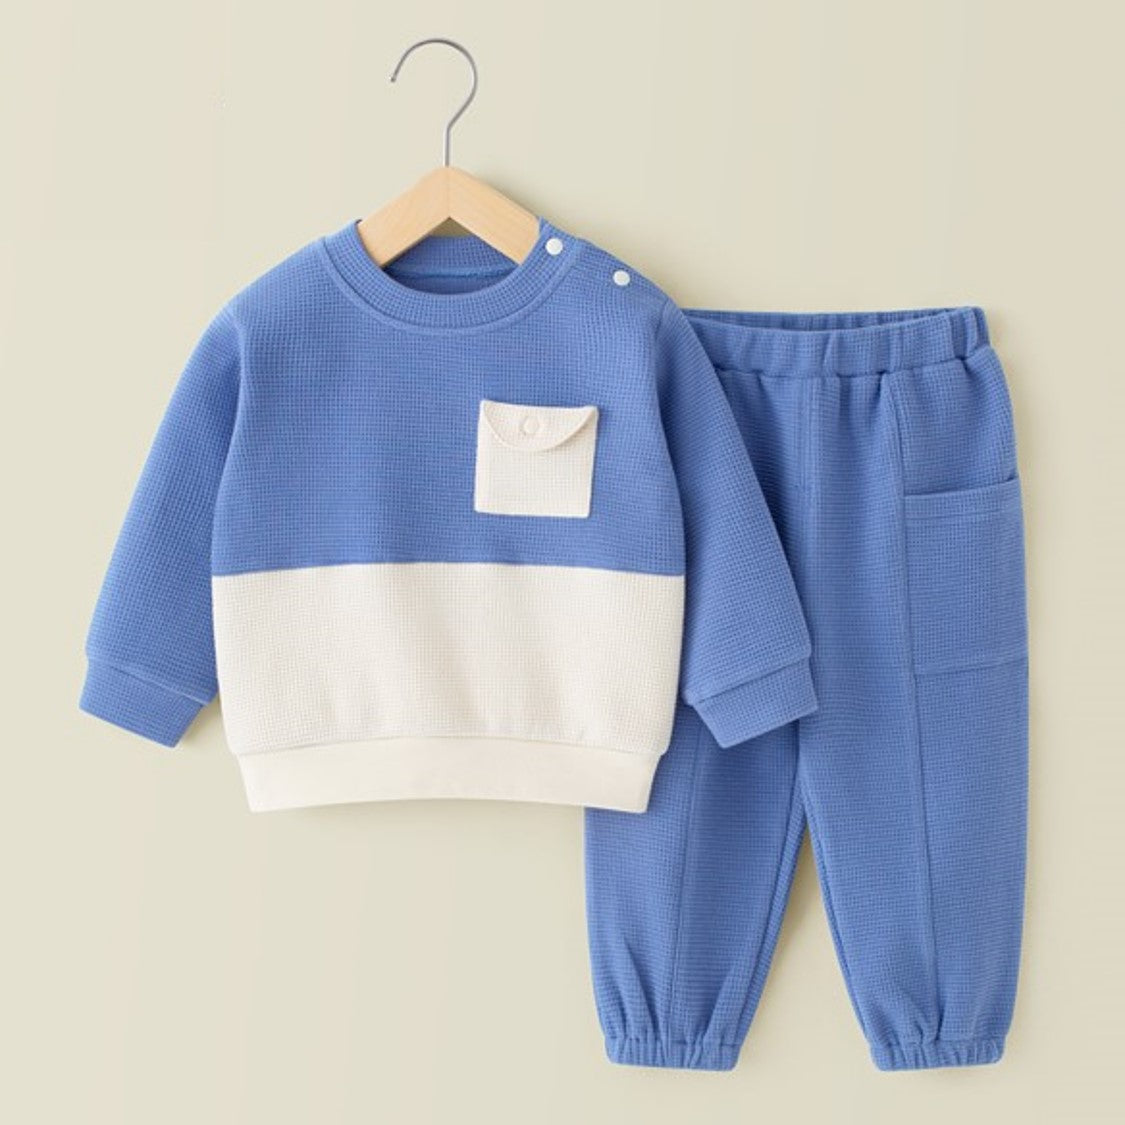 Bubs n Kids Cool Top and Pants Set Review